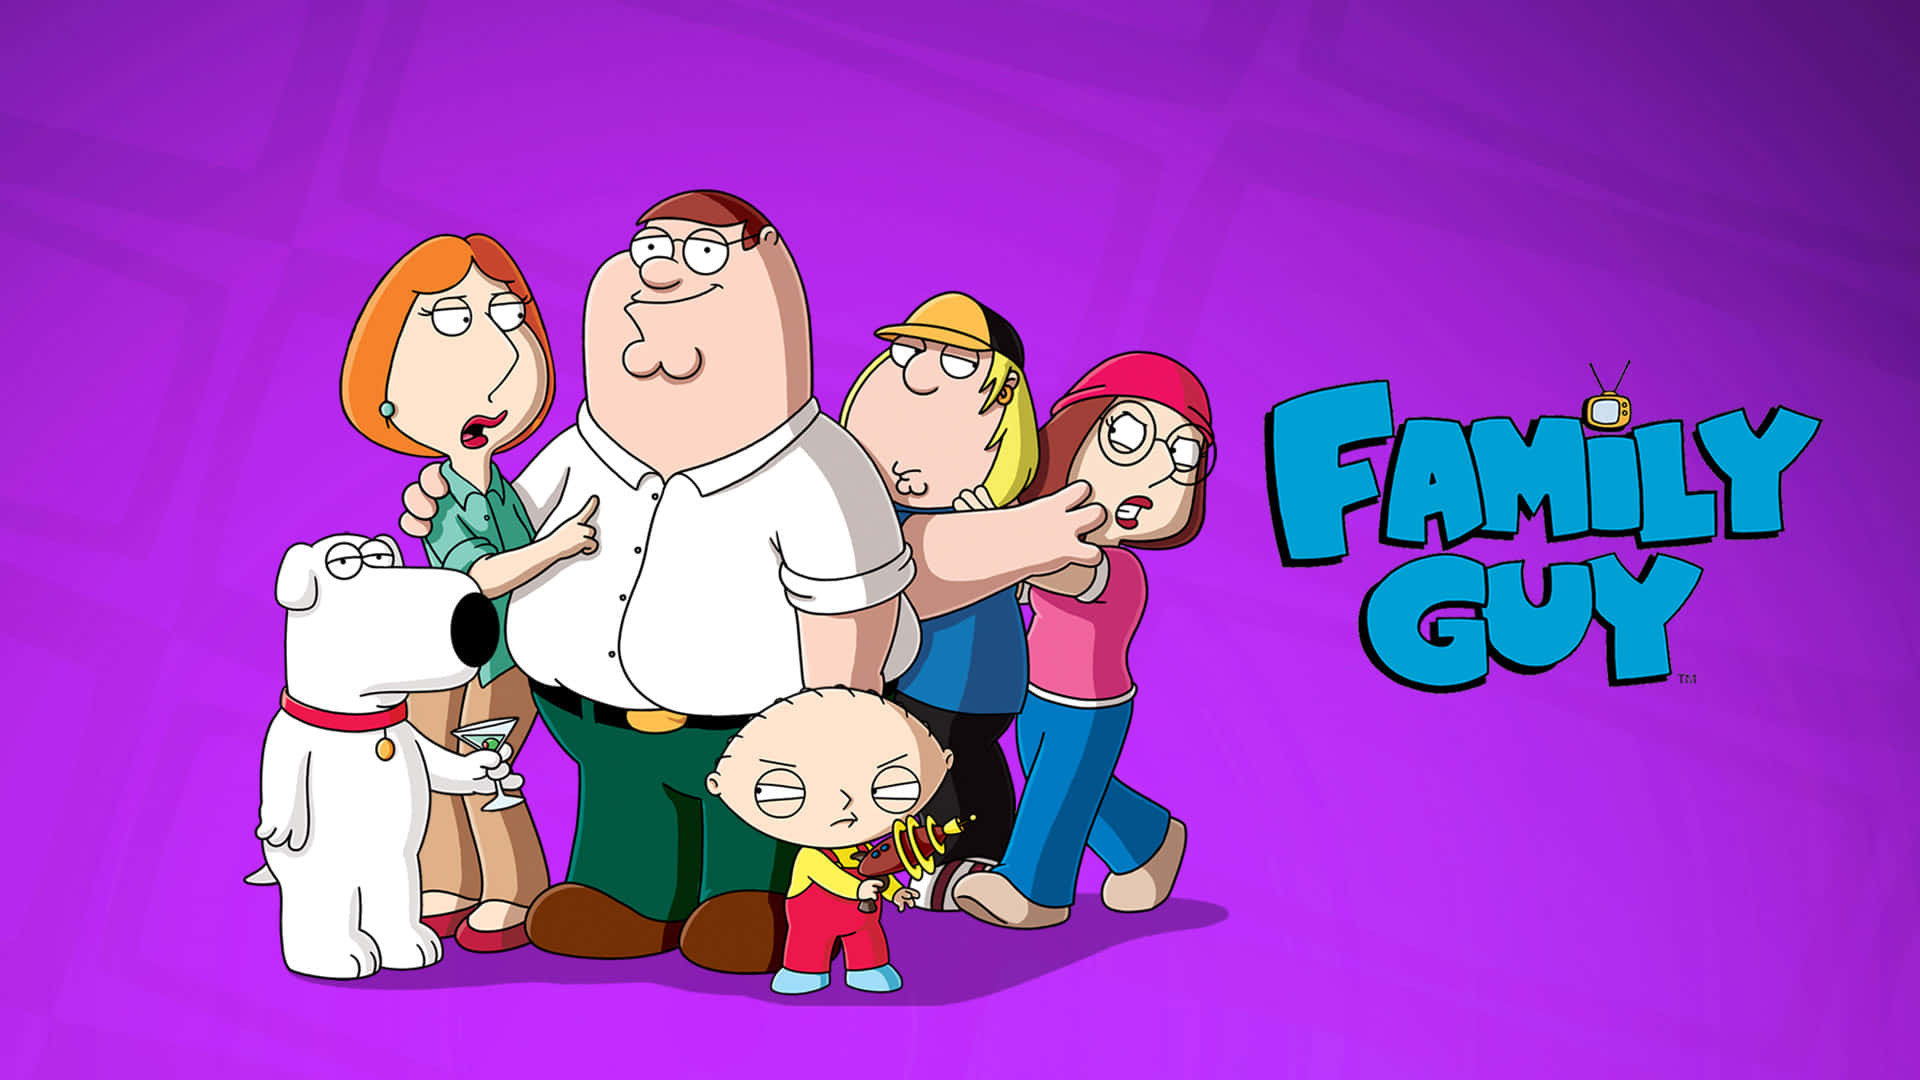 Enjoy the chaos with Family Guy!